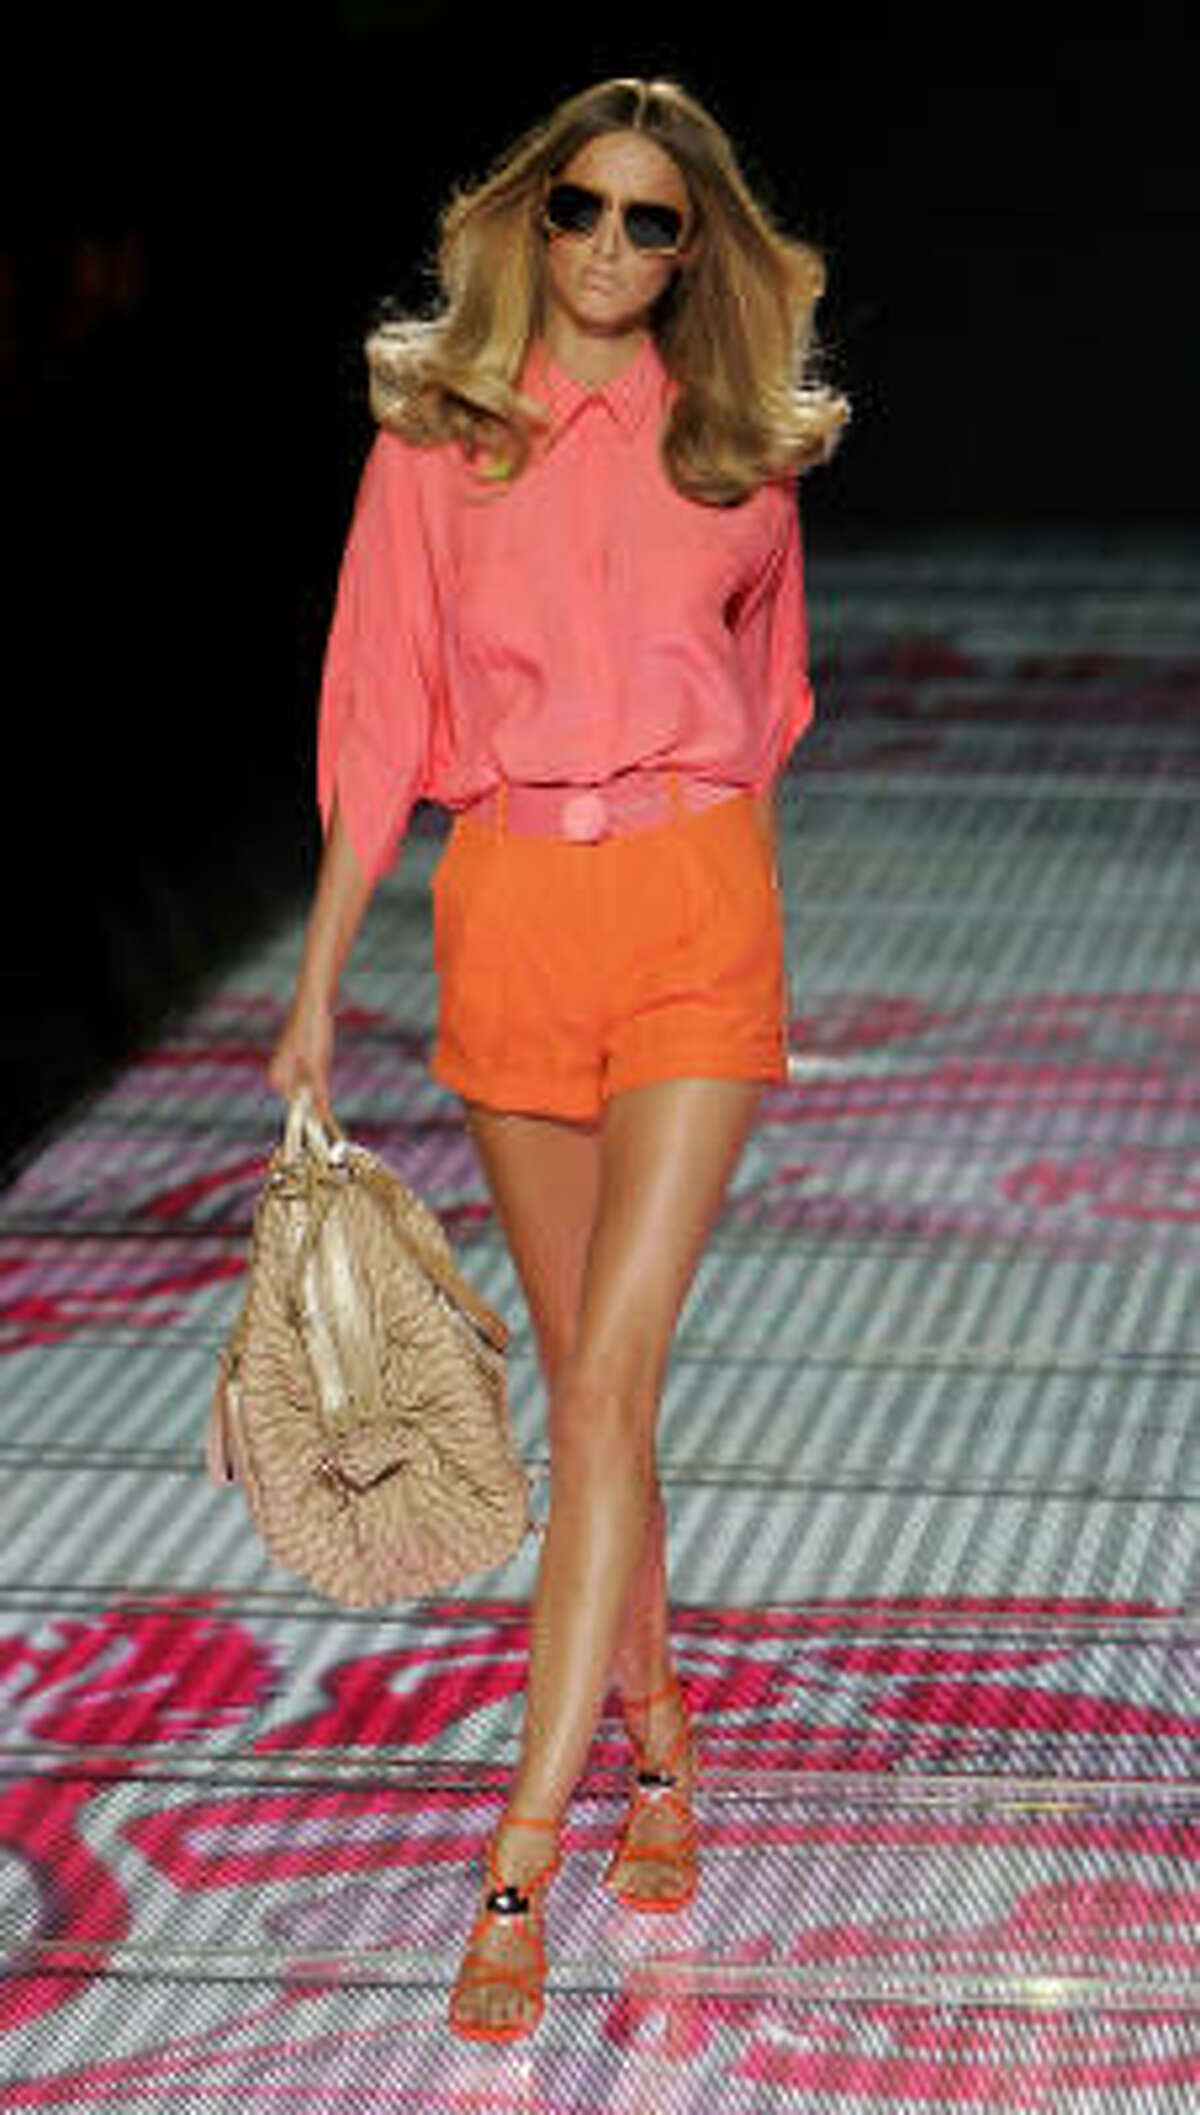 A model wears an outfit part of Gianni Versace Spring-Summer 2007